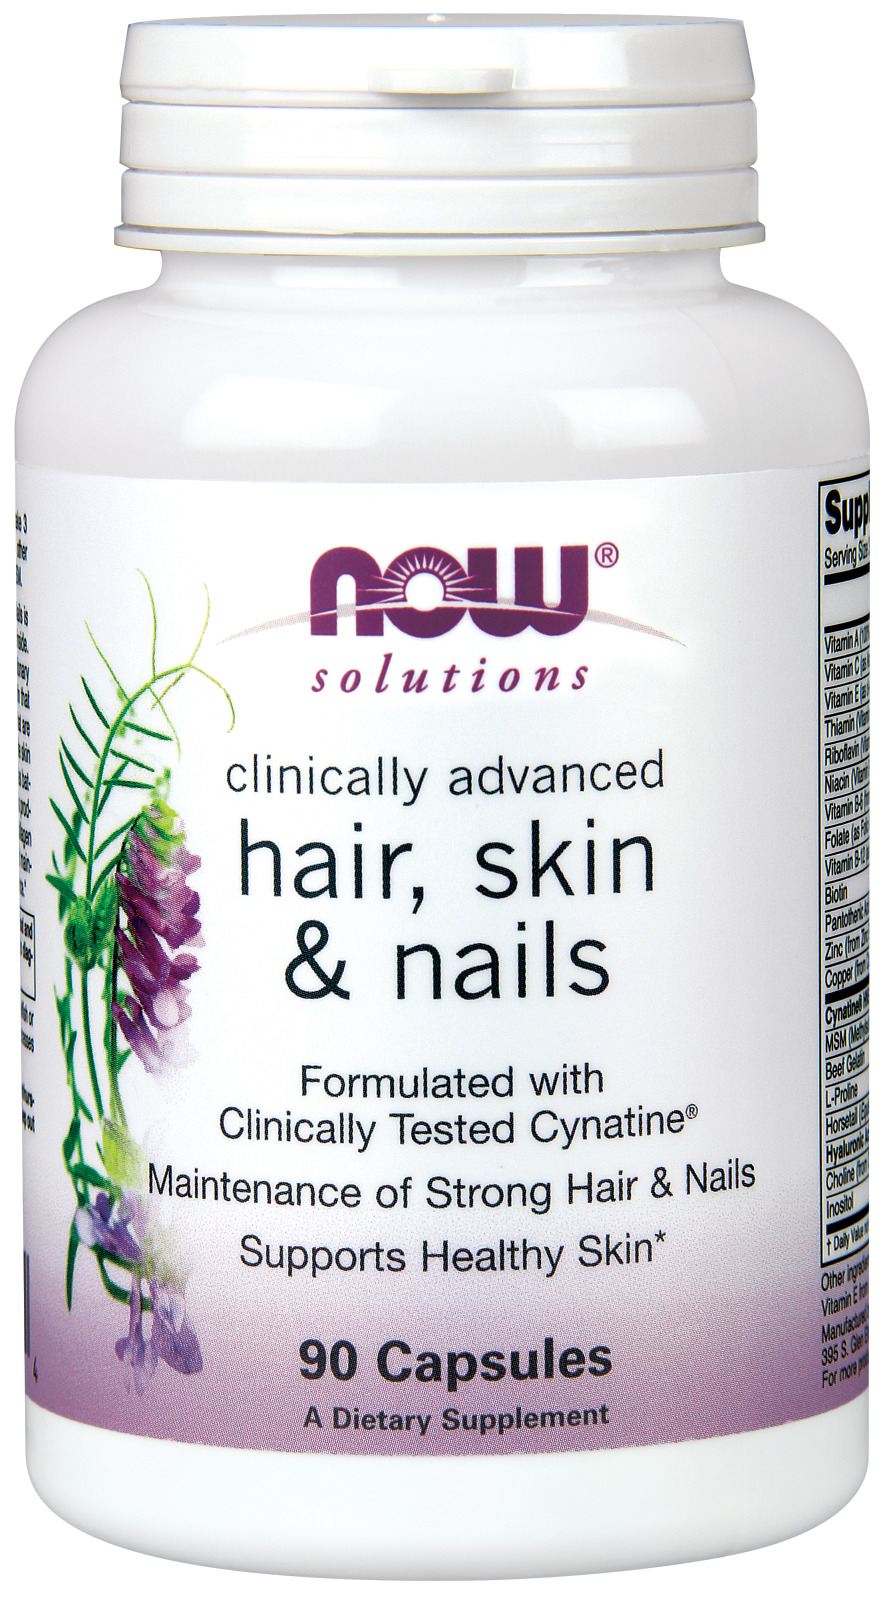 Hair Skin Nails Capsules The Daily Apple